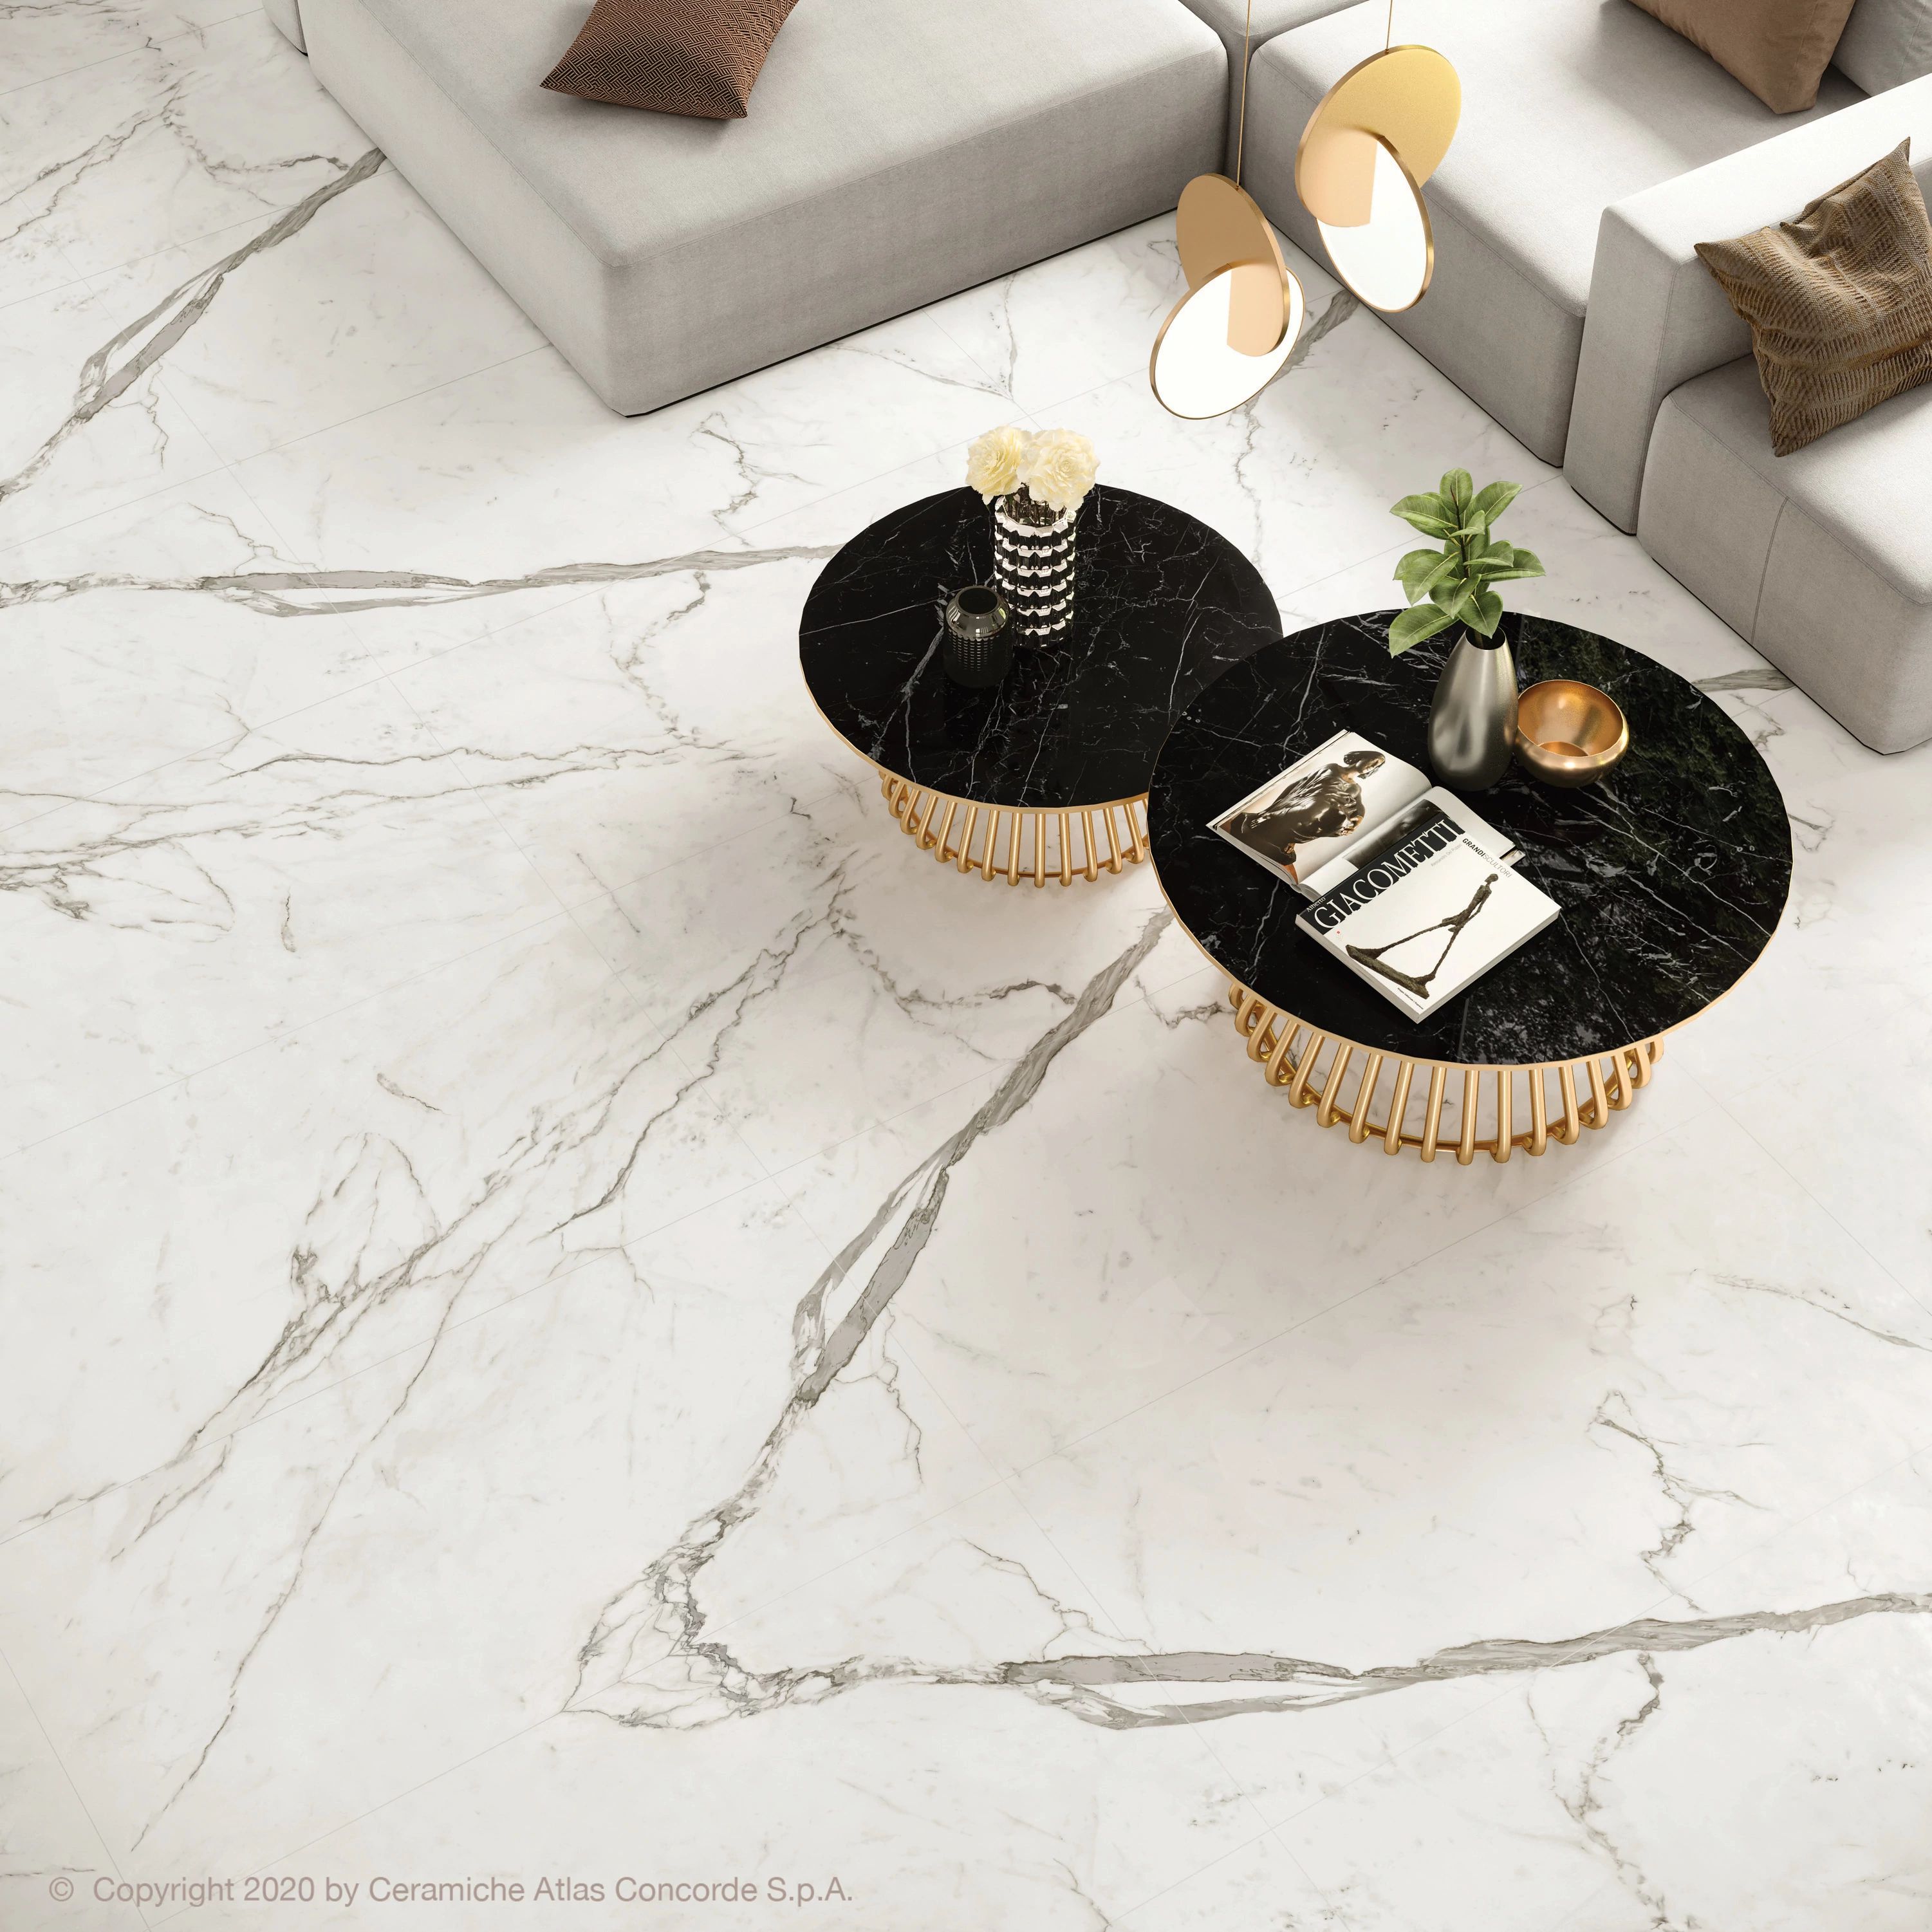 Marvel is a rectified color body porcelain tile which is inspired by the prestige of the most precious marbles of Italian tradition.